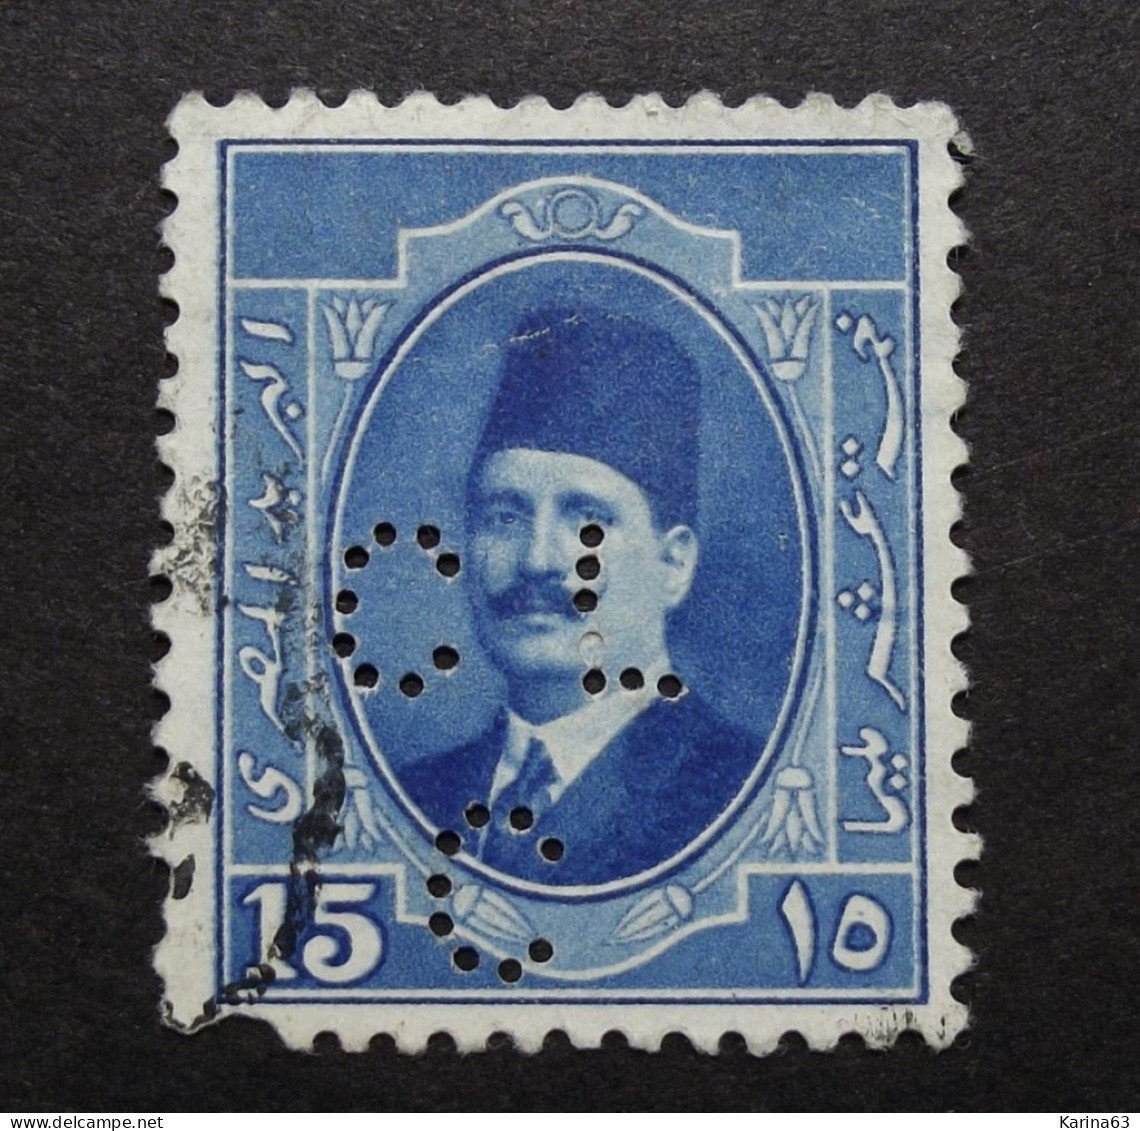 Egypt - 1931 -  Perfin - Lochung  - C L / C  - Cancelled - 1915-1921 Brits Protectoraat